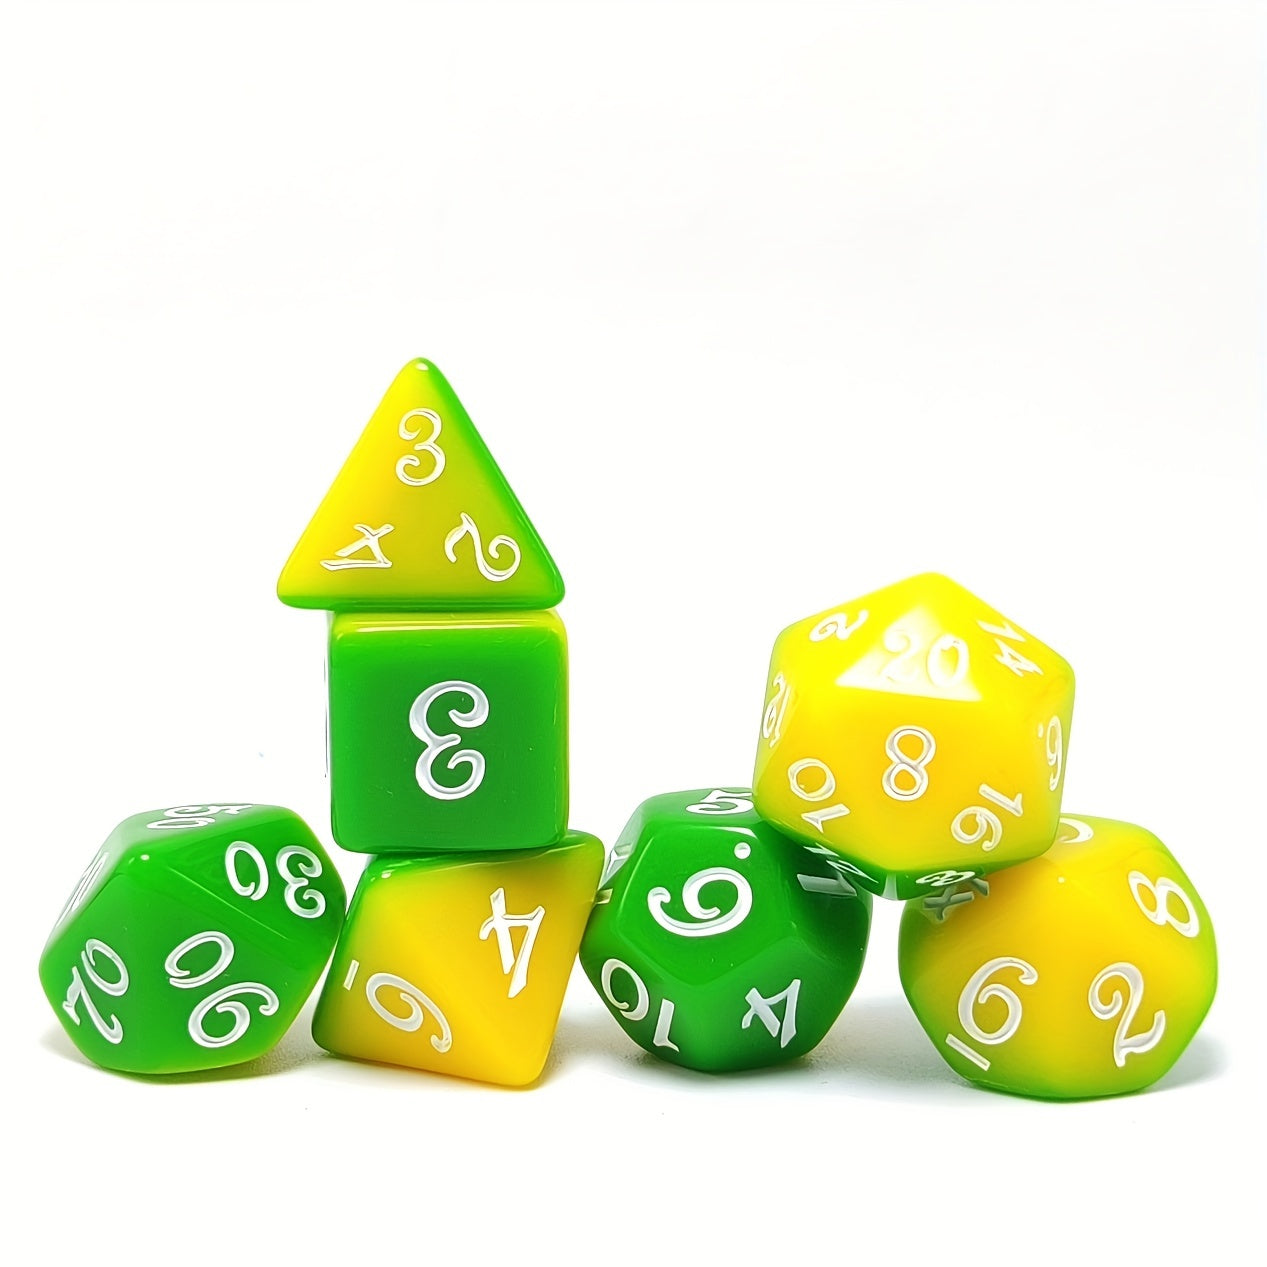 FREE Today: Yellow Green Layered Design Board Game Dice Set